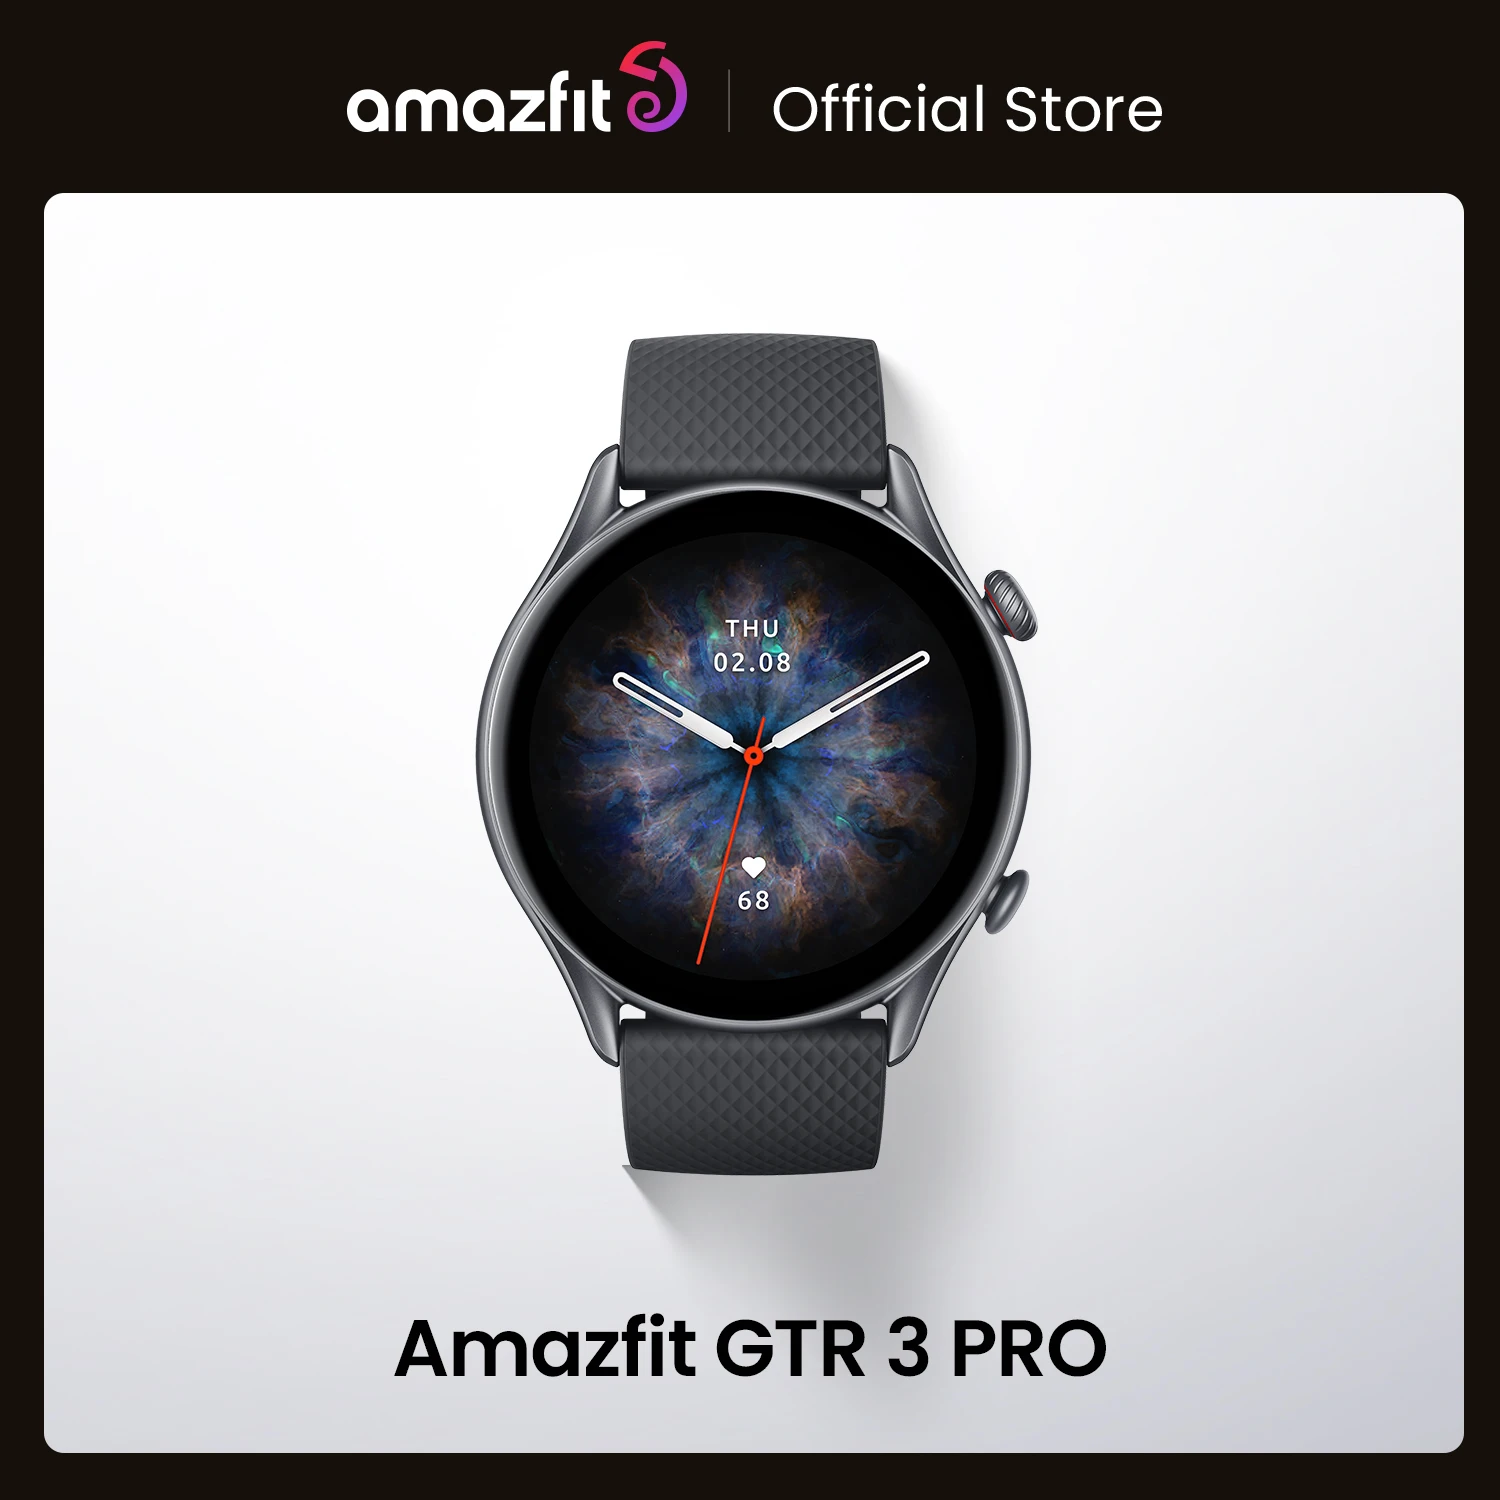 New Amazfit GTR 3 Pro GTR3 Pro GTR-3 Pro Smartwatch 1.45" AMOLED Display Alexa Built-in GPS with Zepp OS for Android IOS